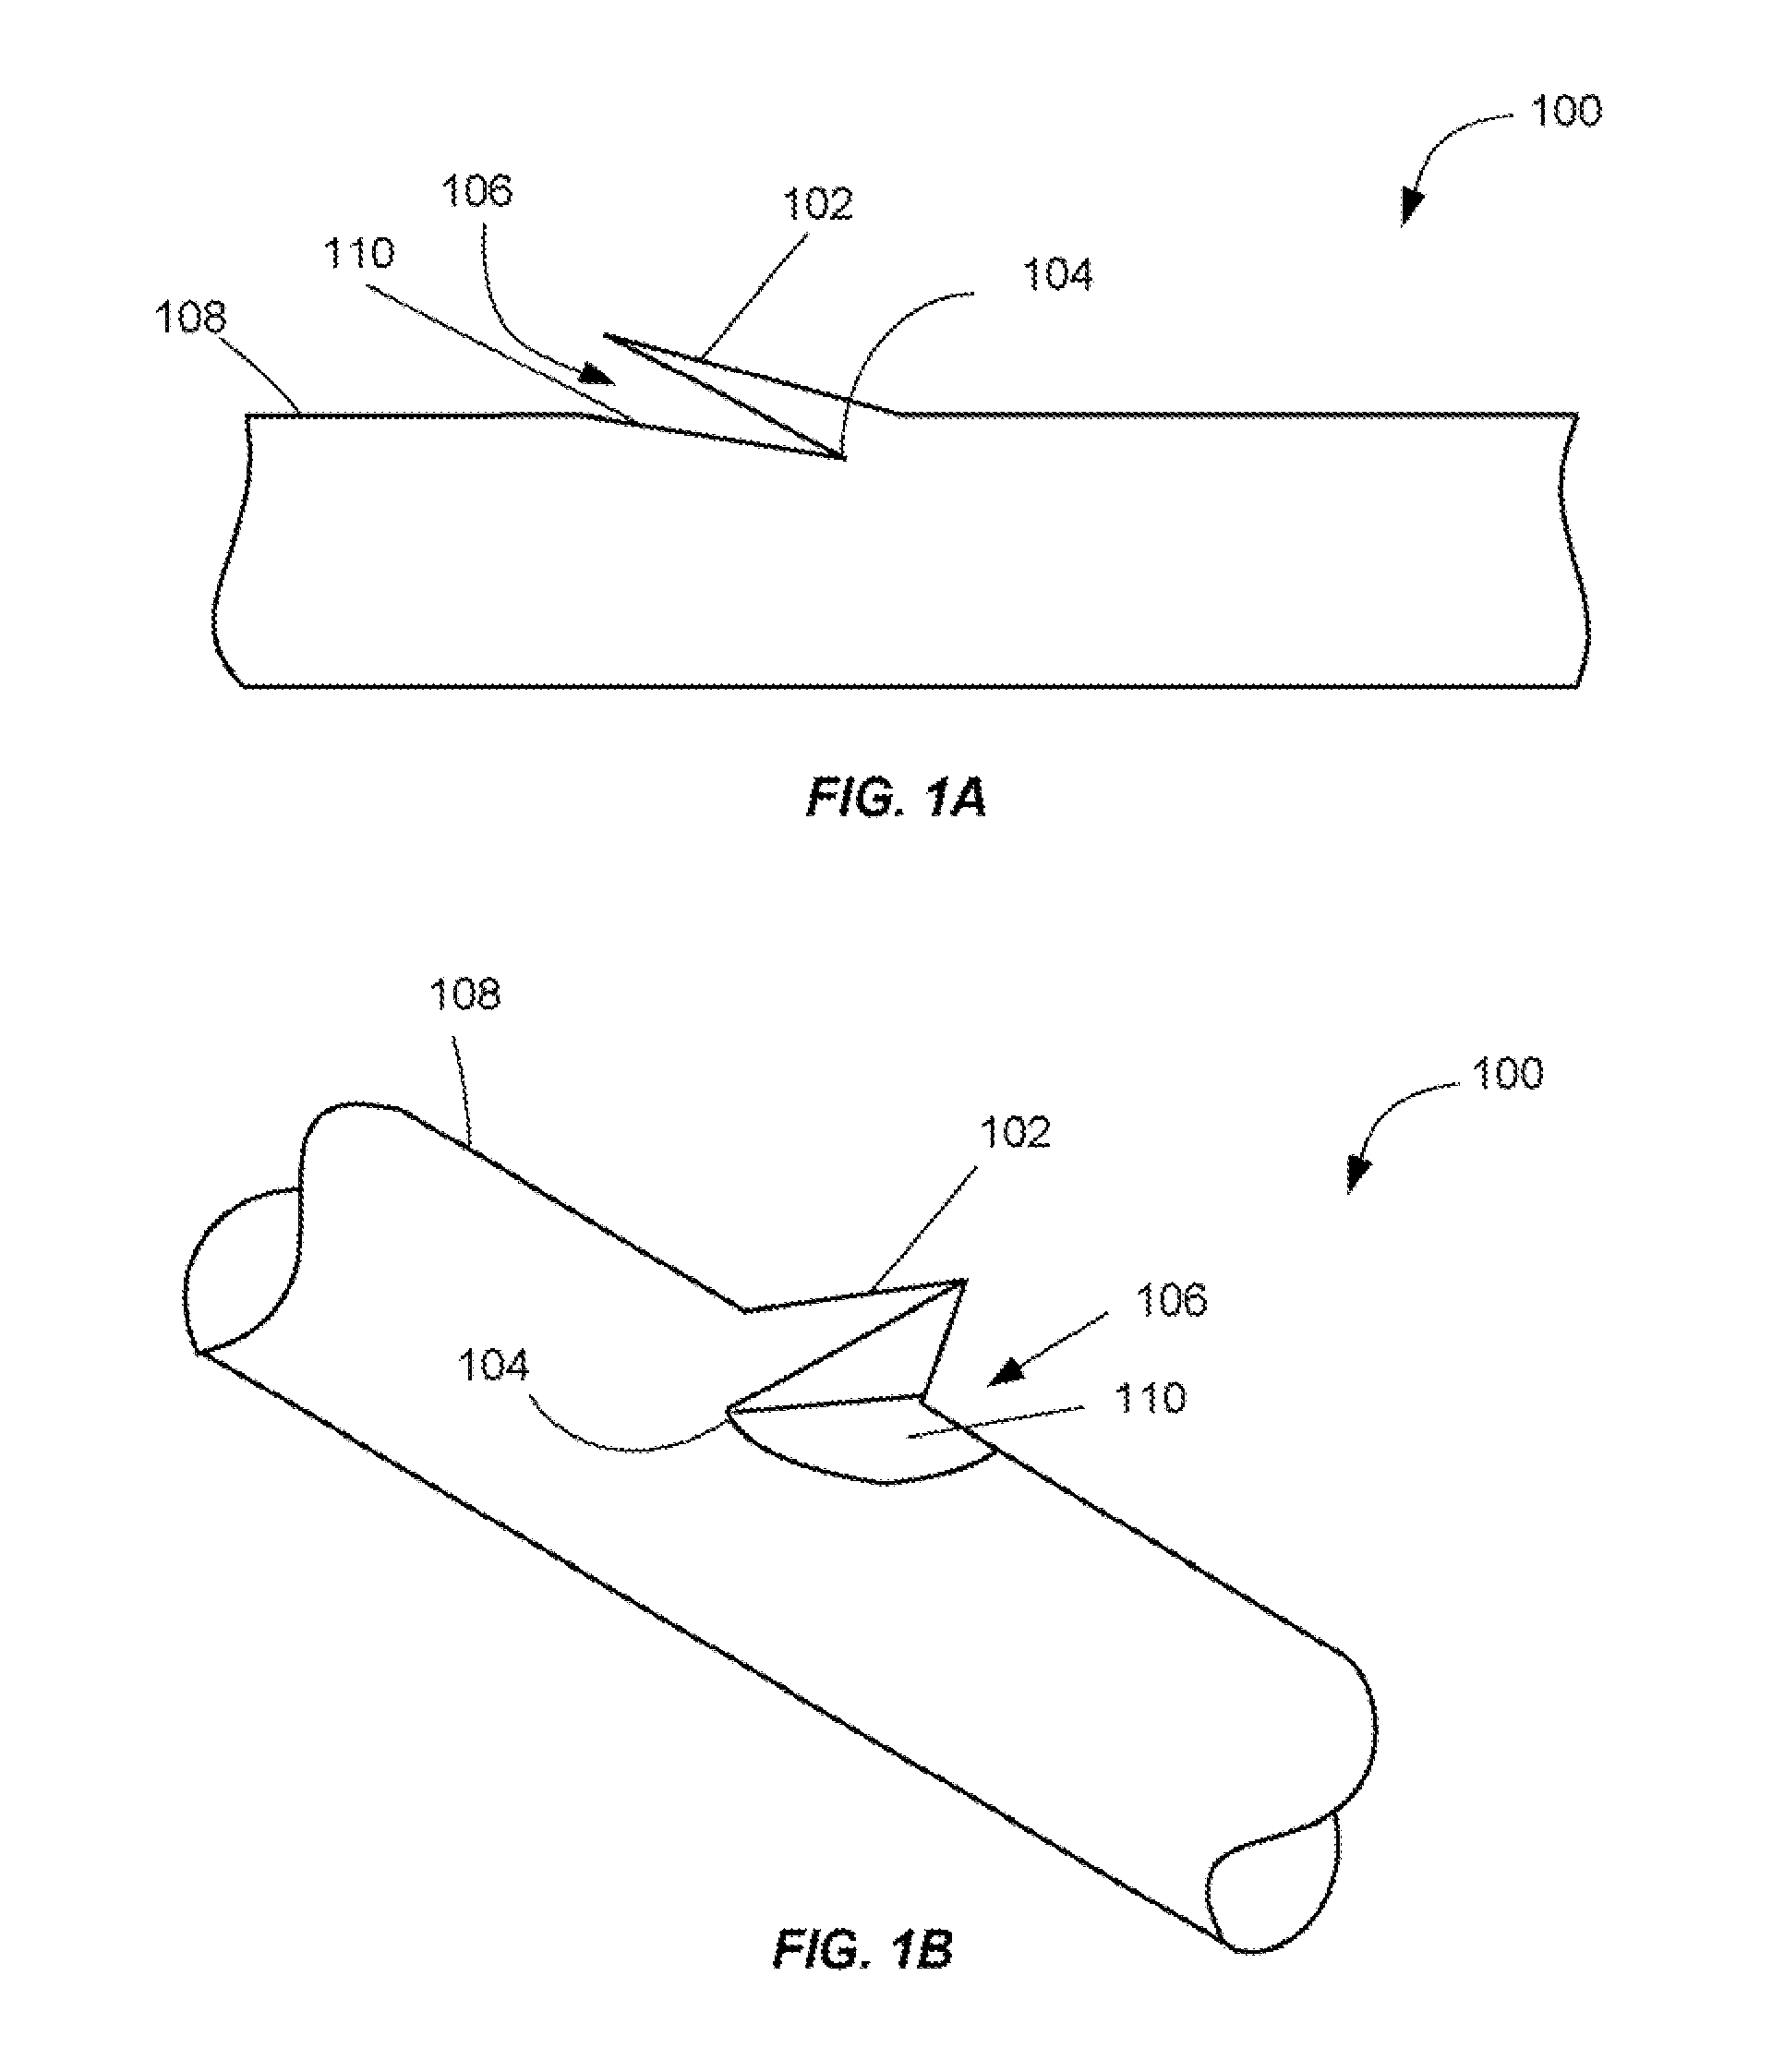 Method and apparatus for elevating retainers on self-retaining sutures